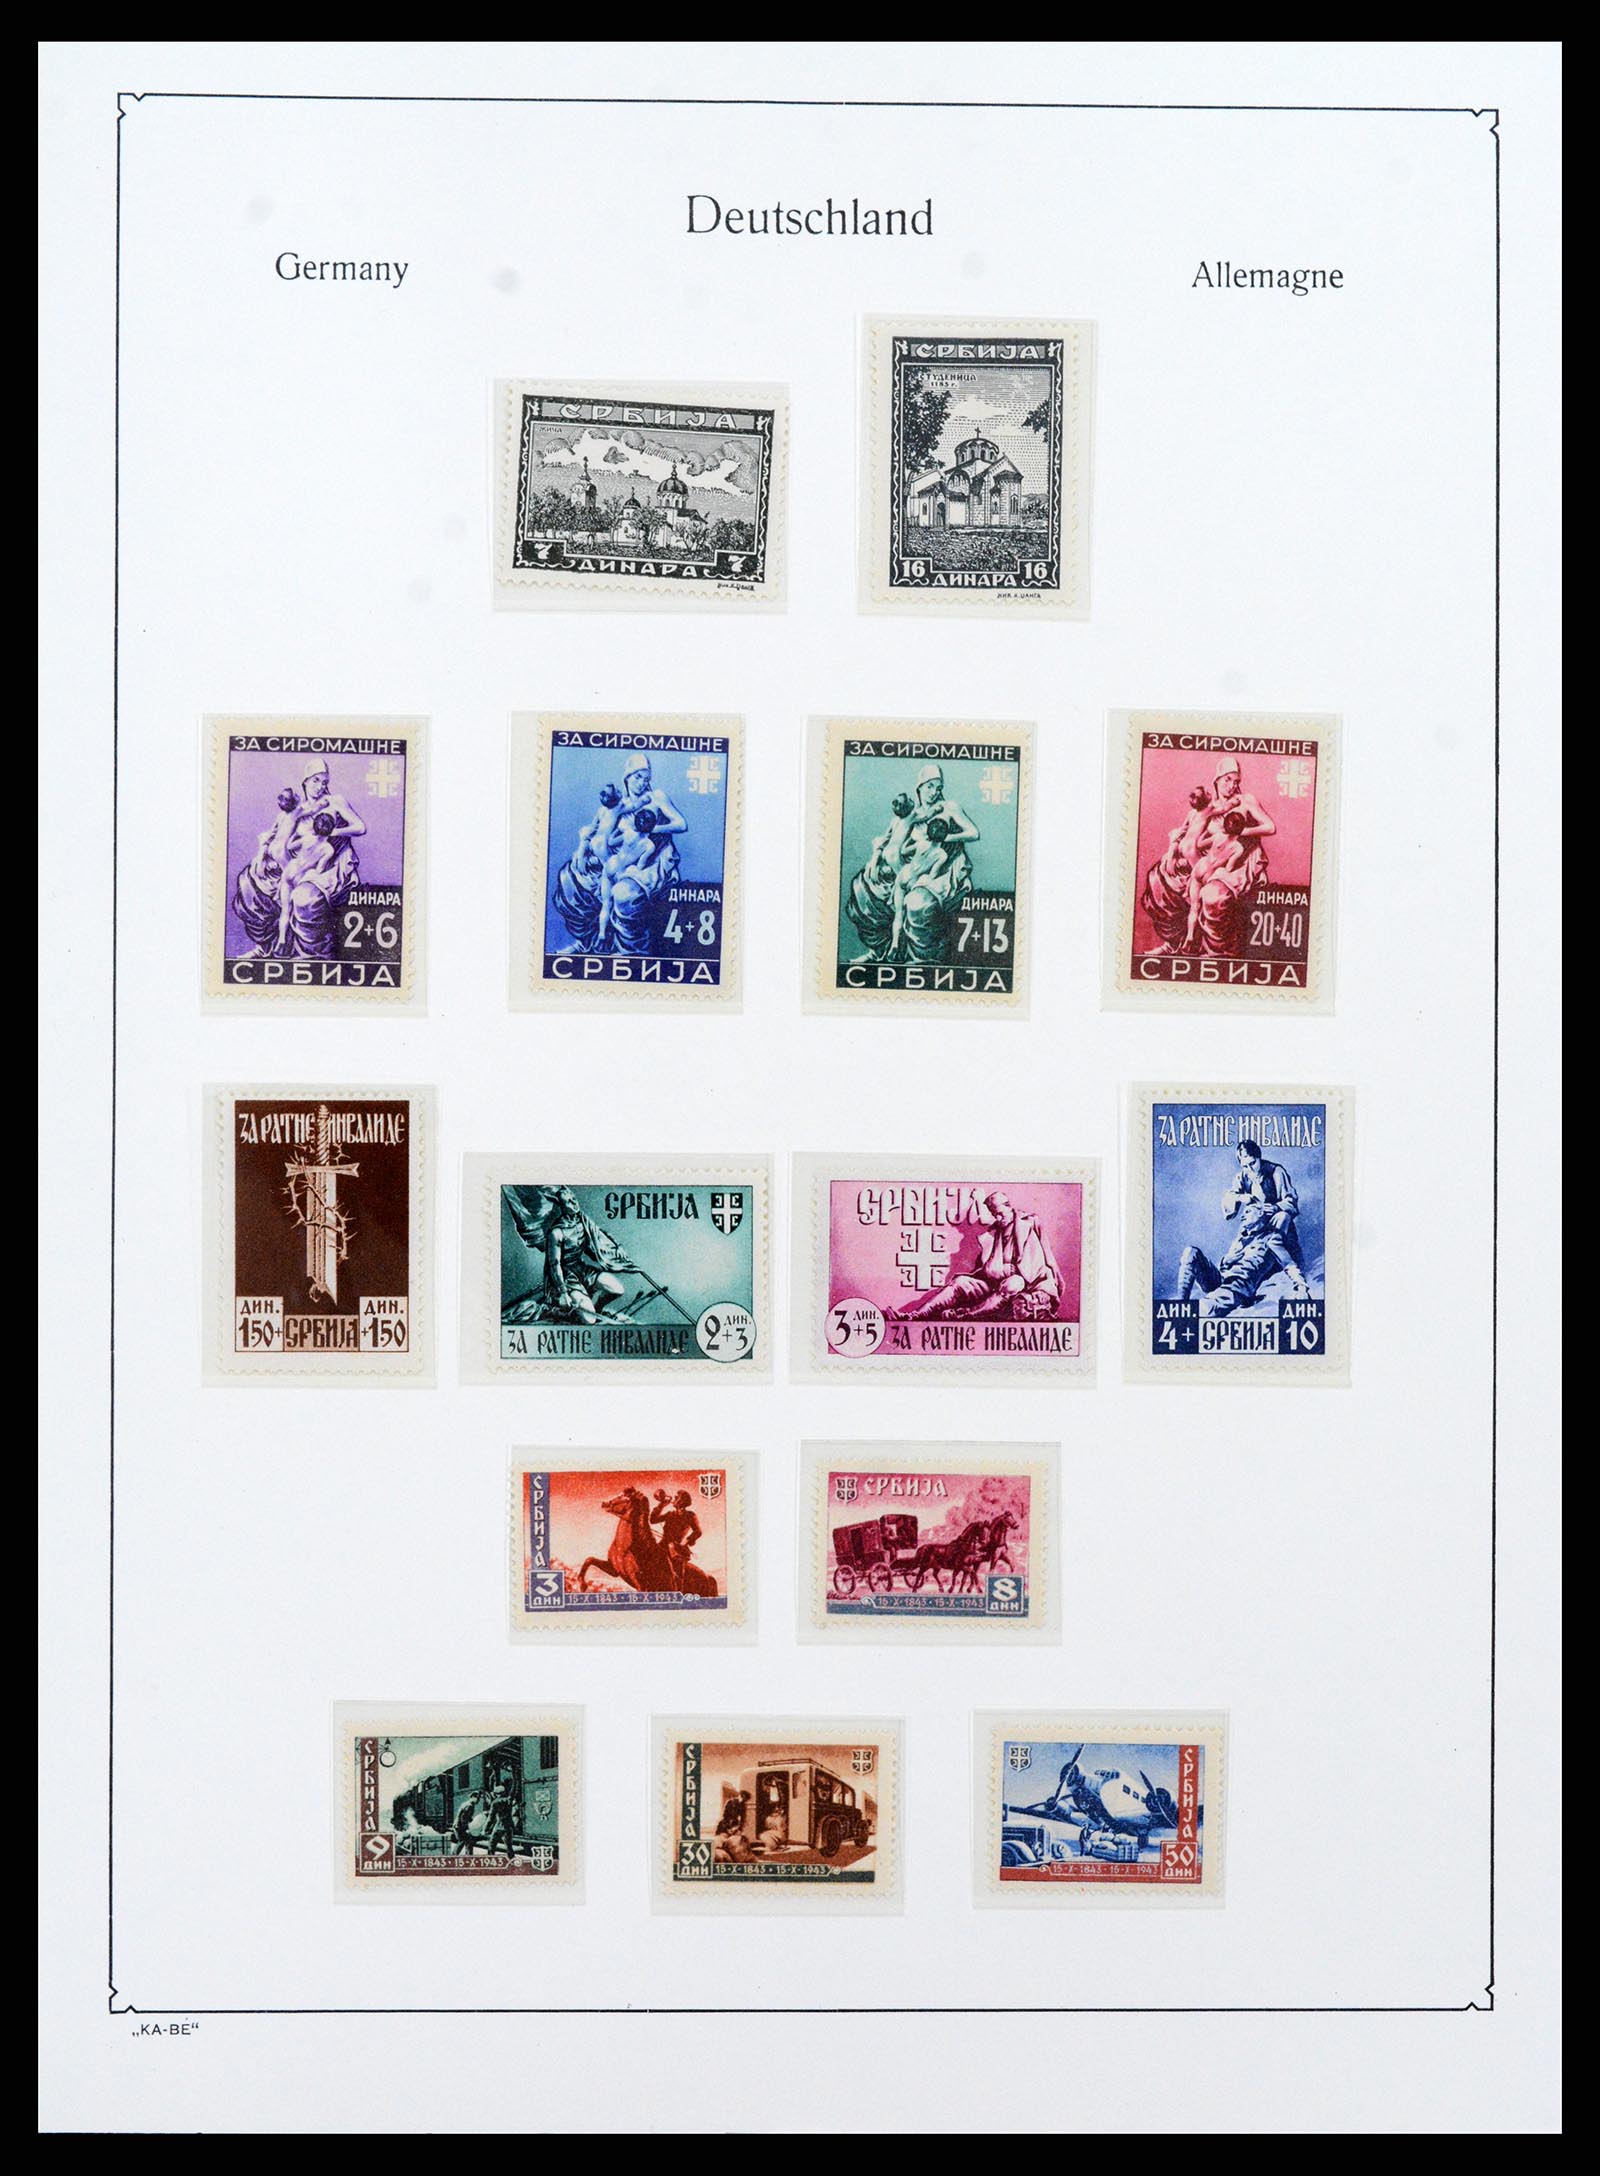 37270 021 - Stamp collection 37270 German occupations 1939-1945.